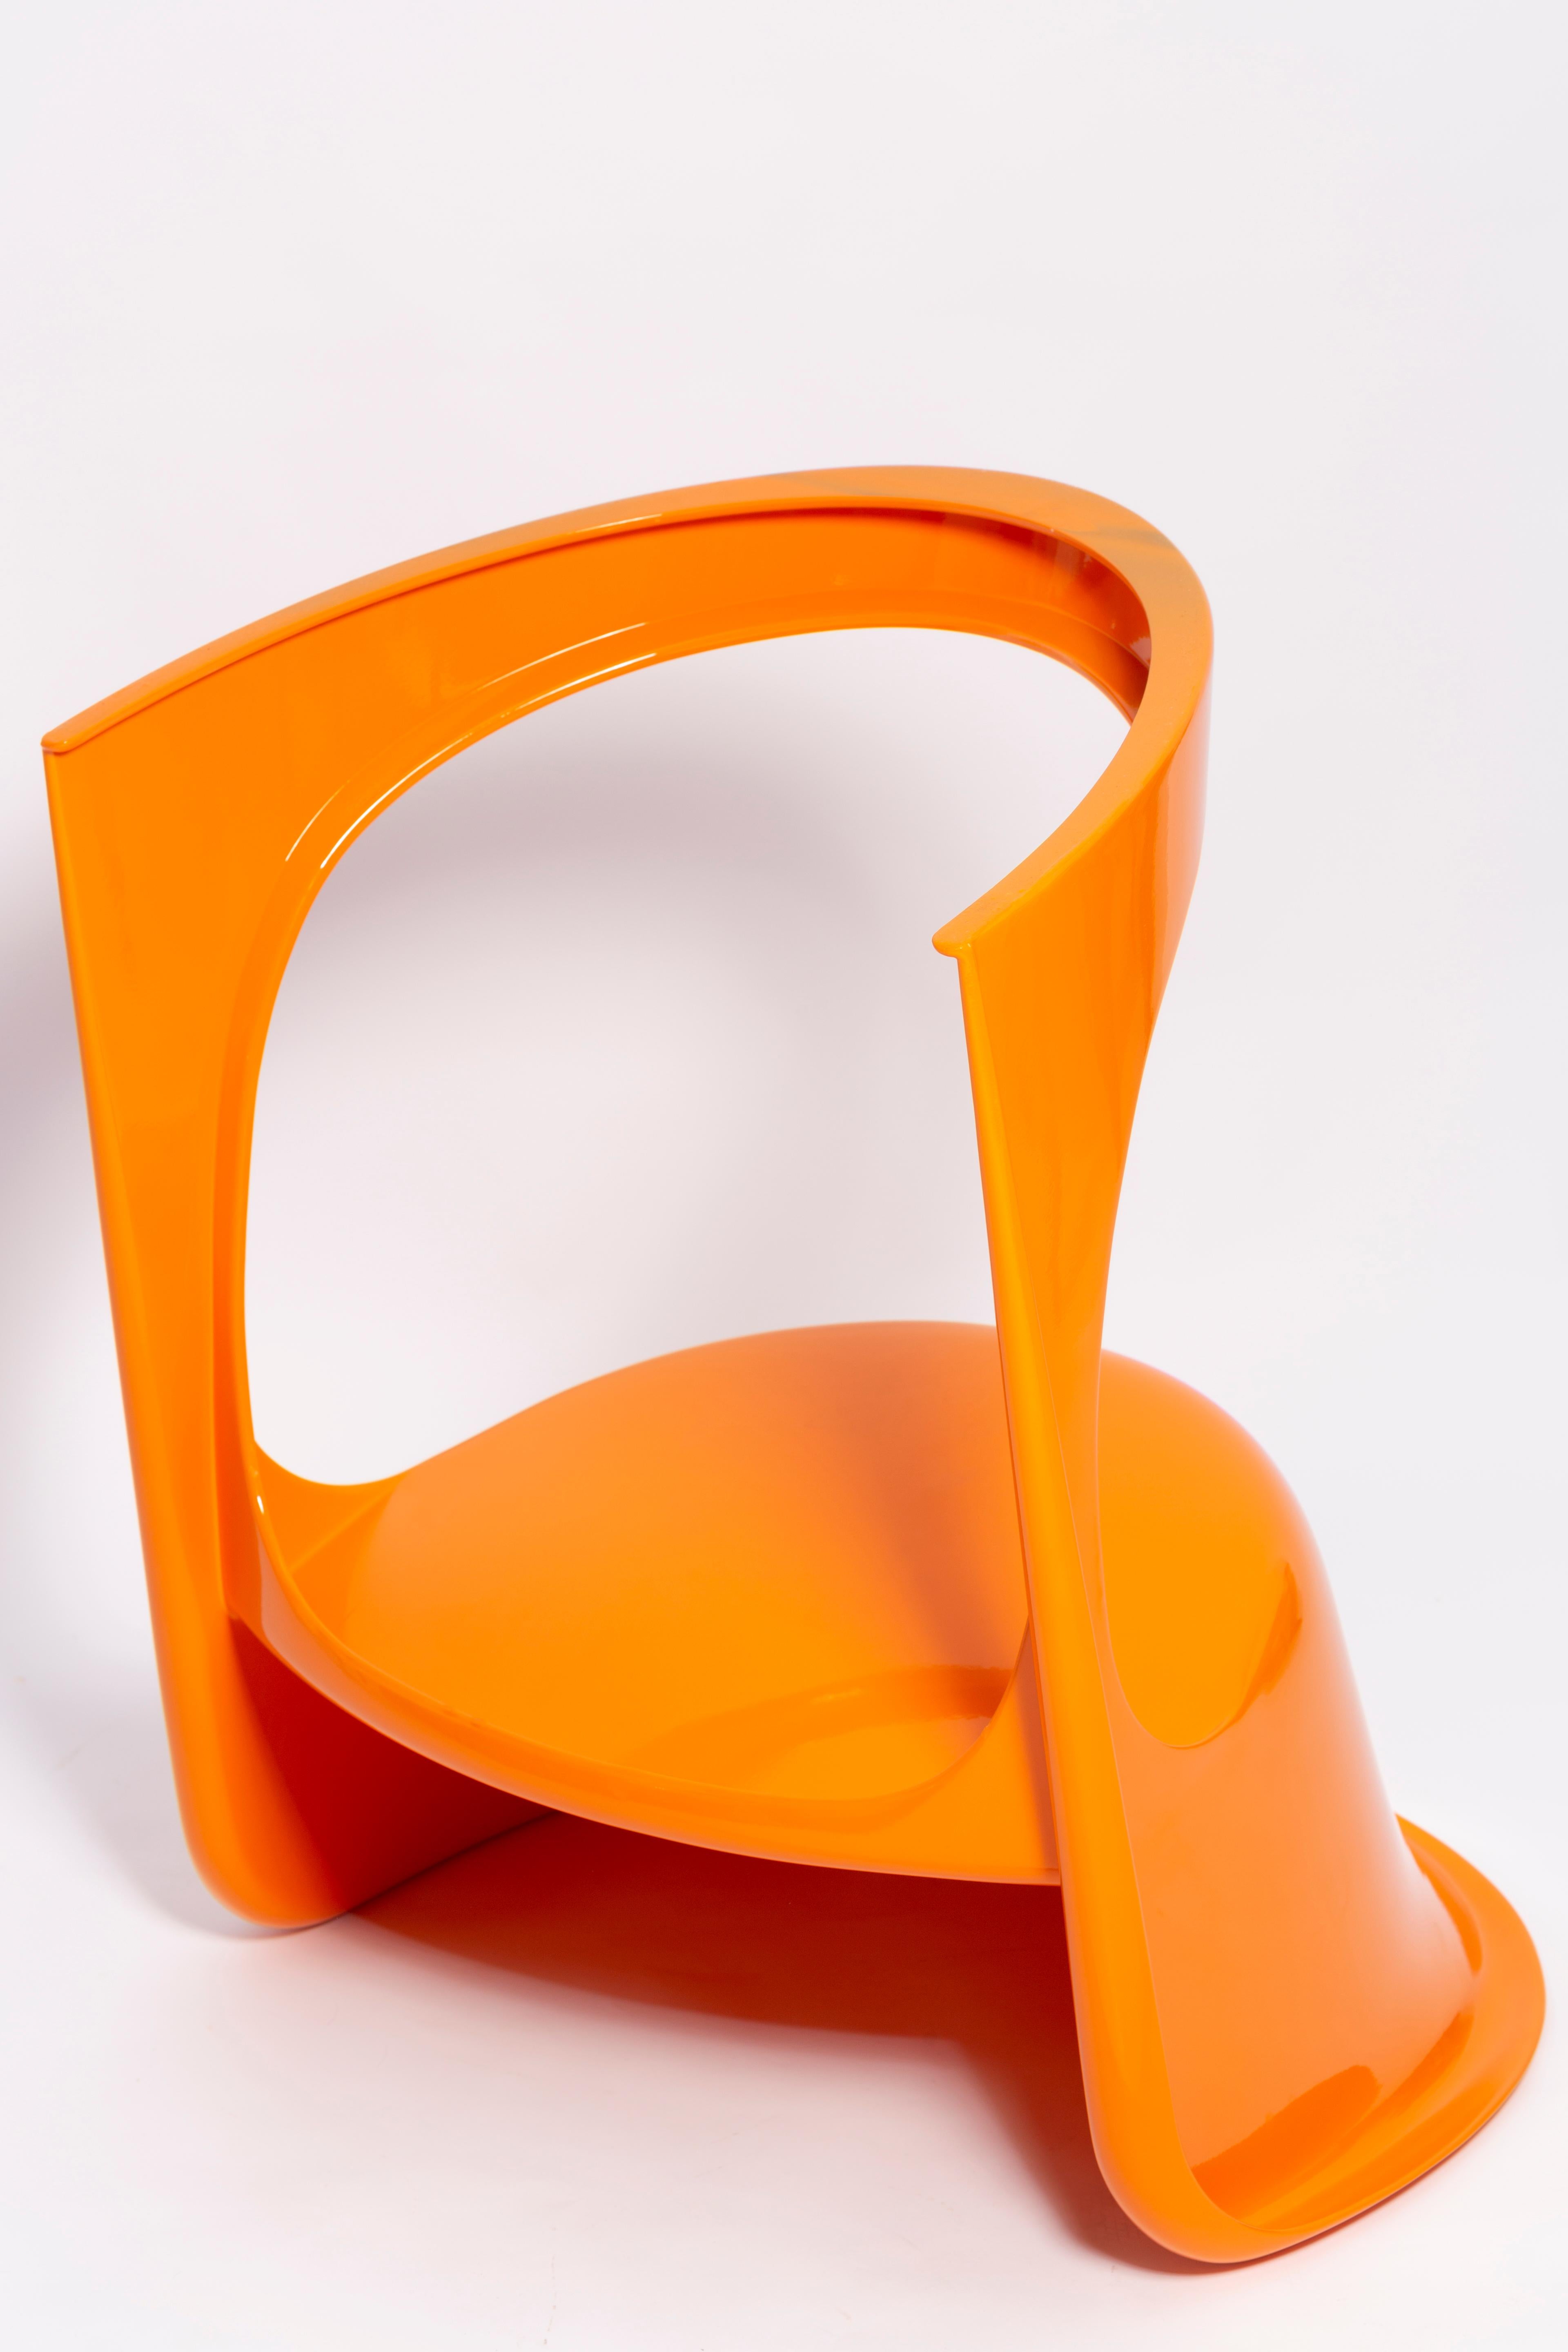 Set of Six Glossy Orange Cado Chairs, Steen Østergaard, 1974 For Sale 2